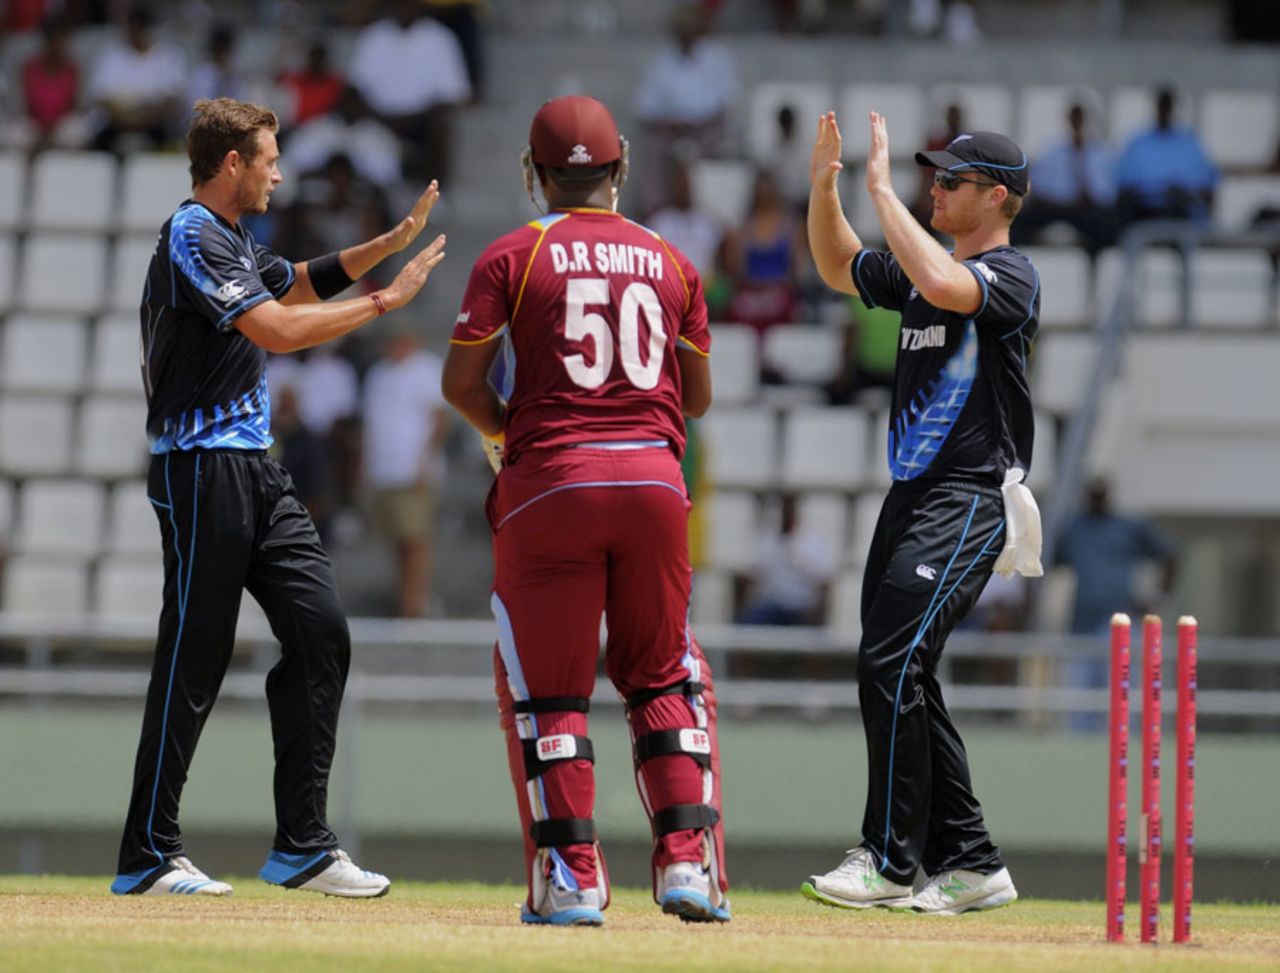 Tim Southee and Corey Anderson celebrate a wicket, West Indies v New Zealand, 2nd T20I, Dominica, July 6, 2014